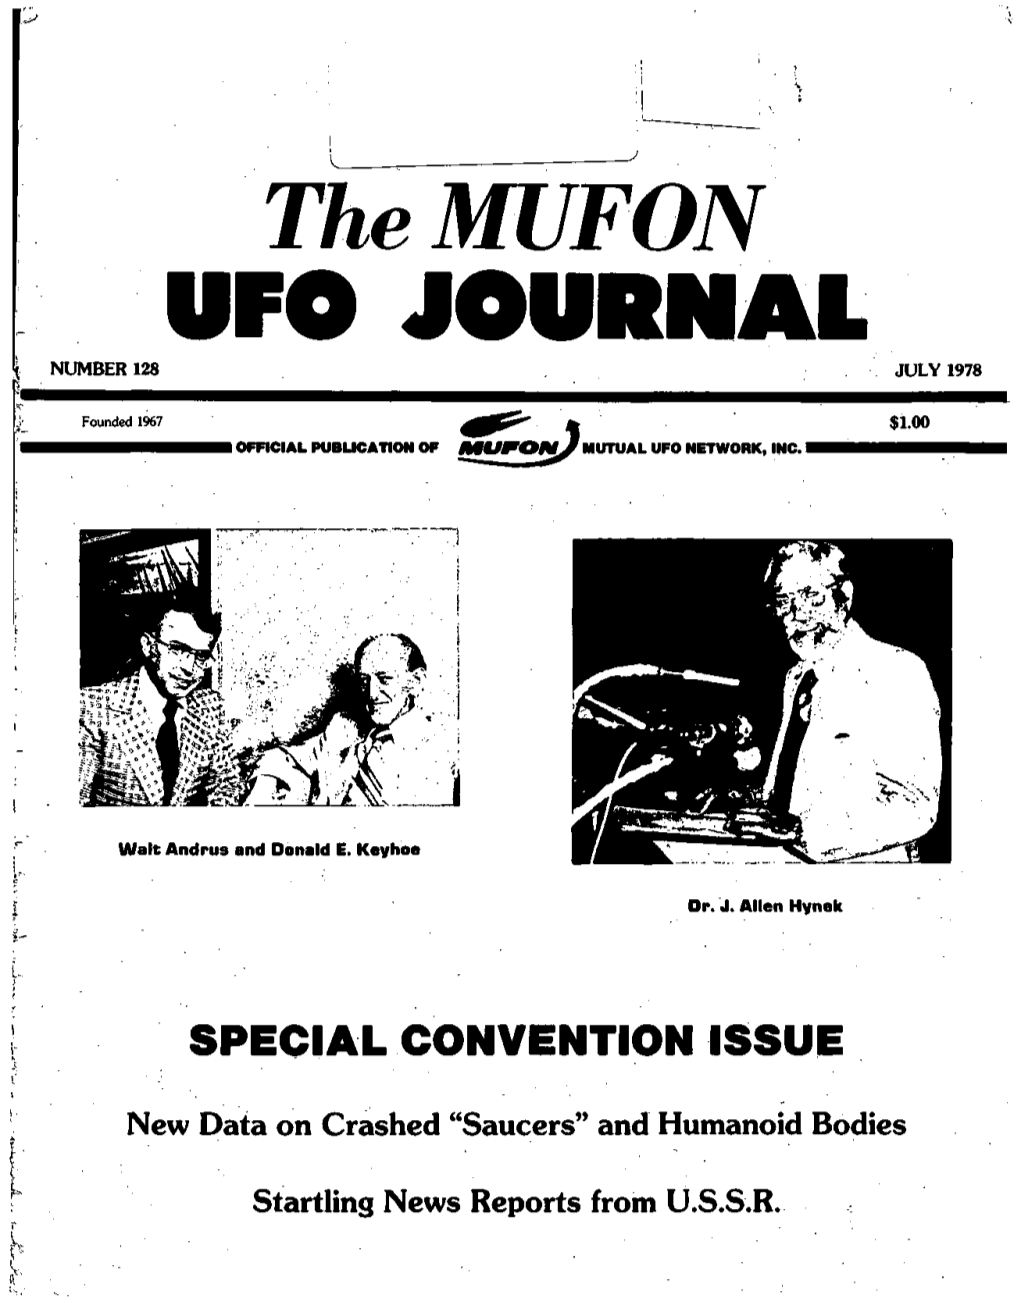 The MUFON UFO JOURNAL NUMBER 128 JULY 1978